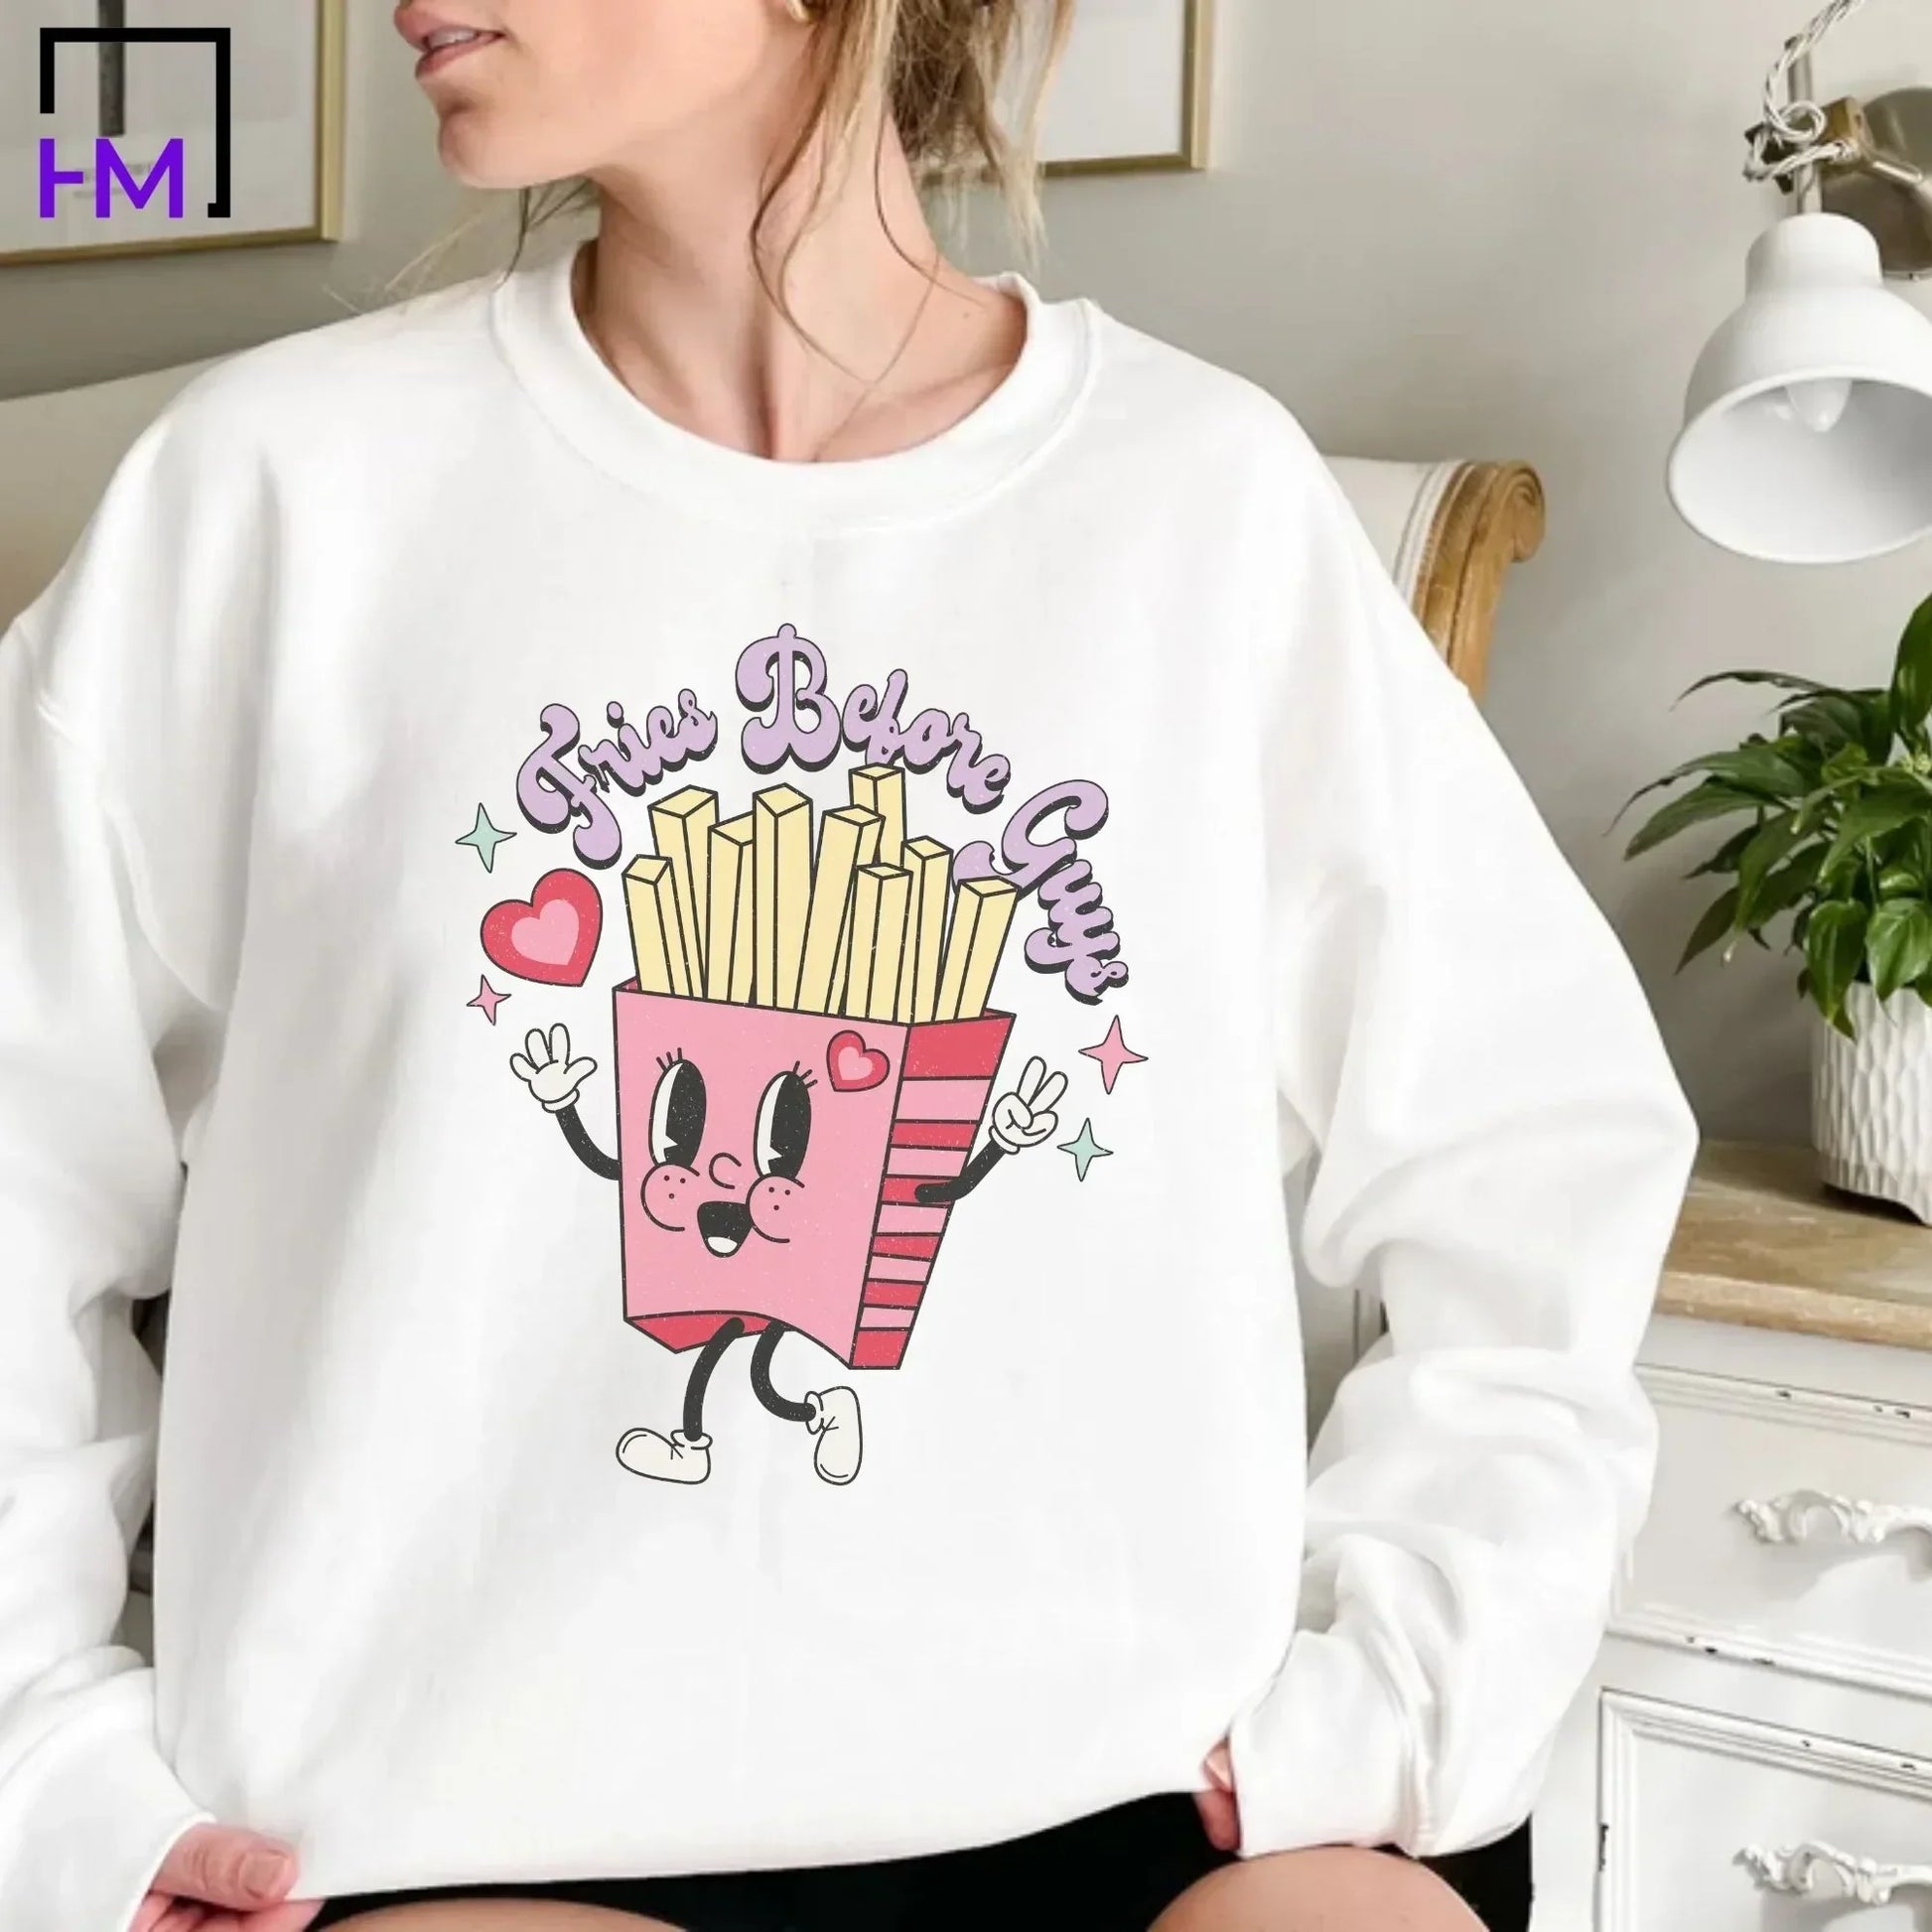 Fries Before Guys, Funny Valentine's Day Shirt, Bestie Valentine's Gift for Her, Love Shirts for Women, Cute V-Day Shirt, Proud to Be Single, Self Love Shirt HMDesignStudioUS